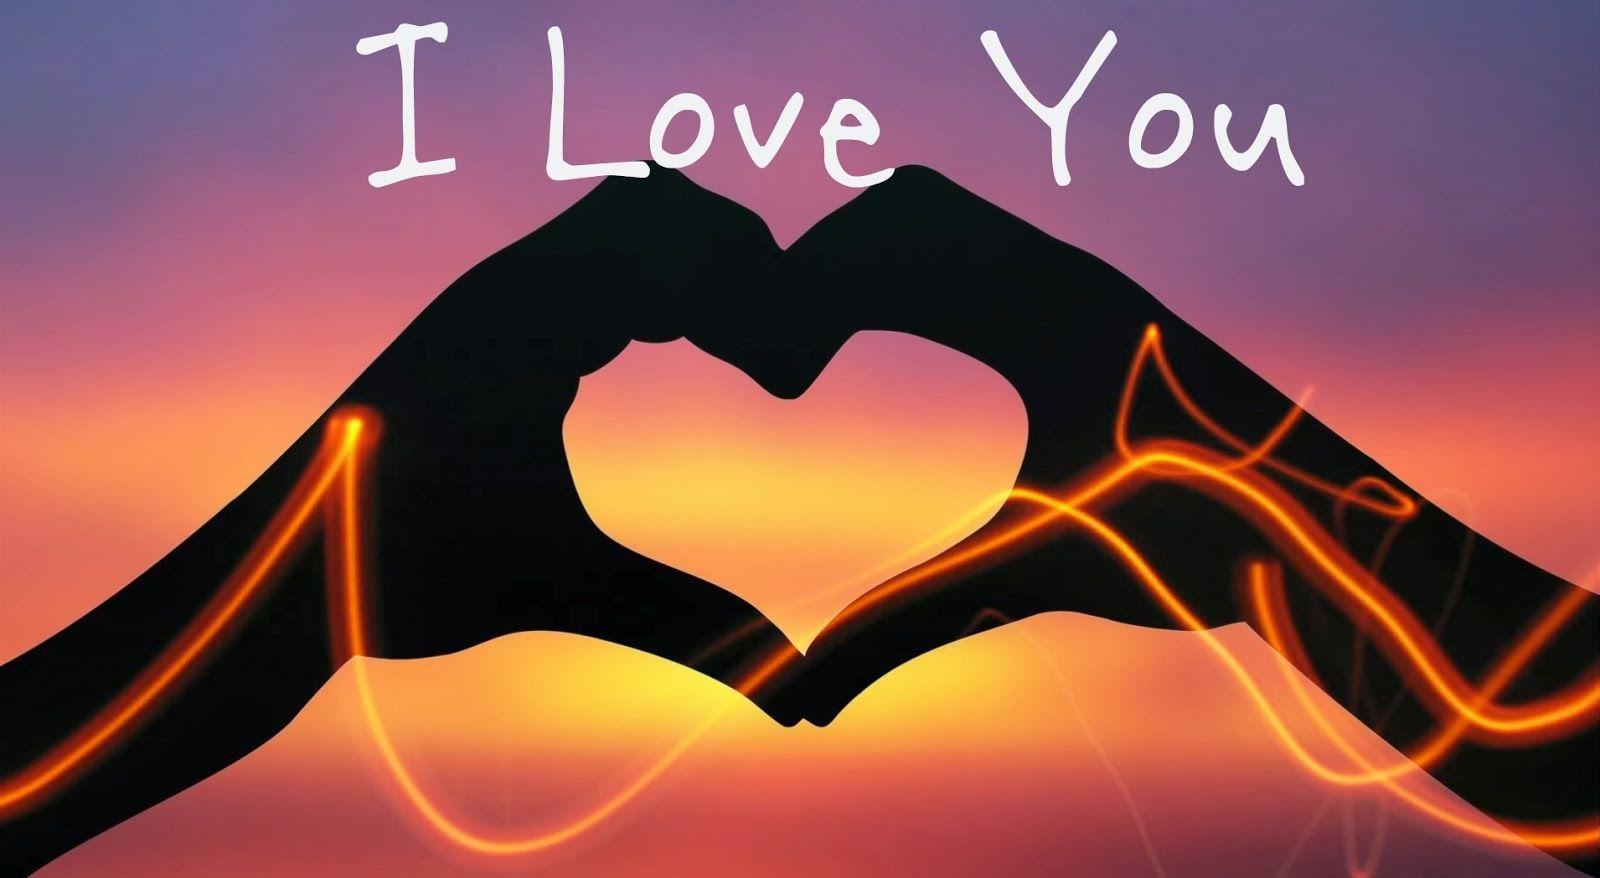 I Love You Wallpapers, Pictures, Image